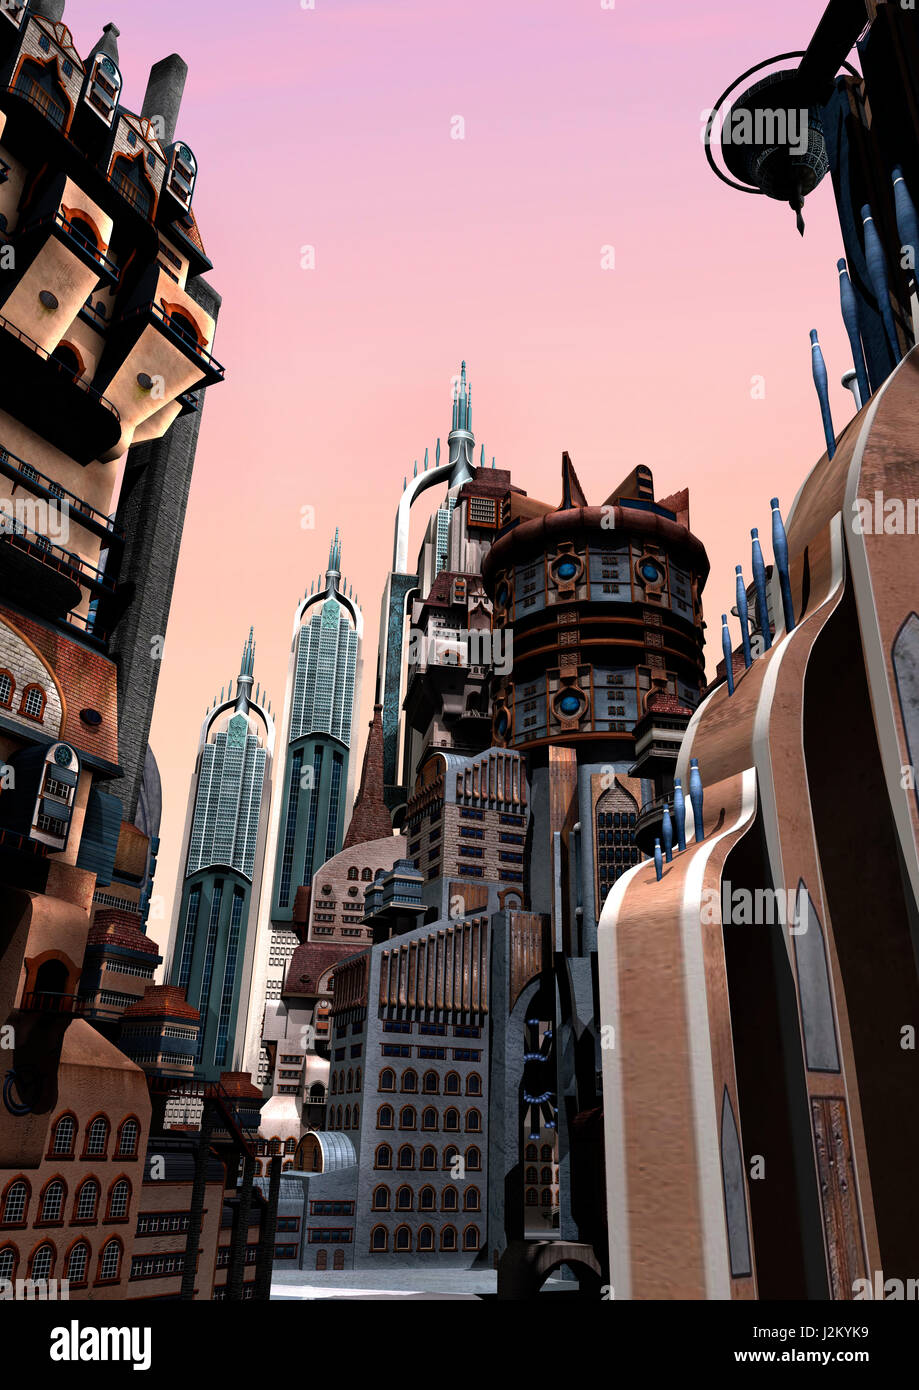 3D rendering of a science fiction futuristic city on pink sky background Stock Photo